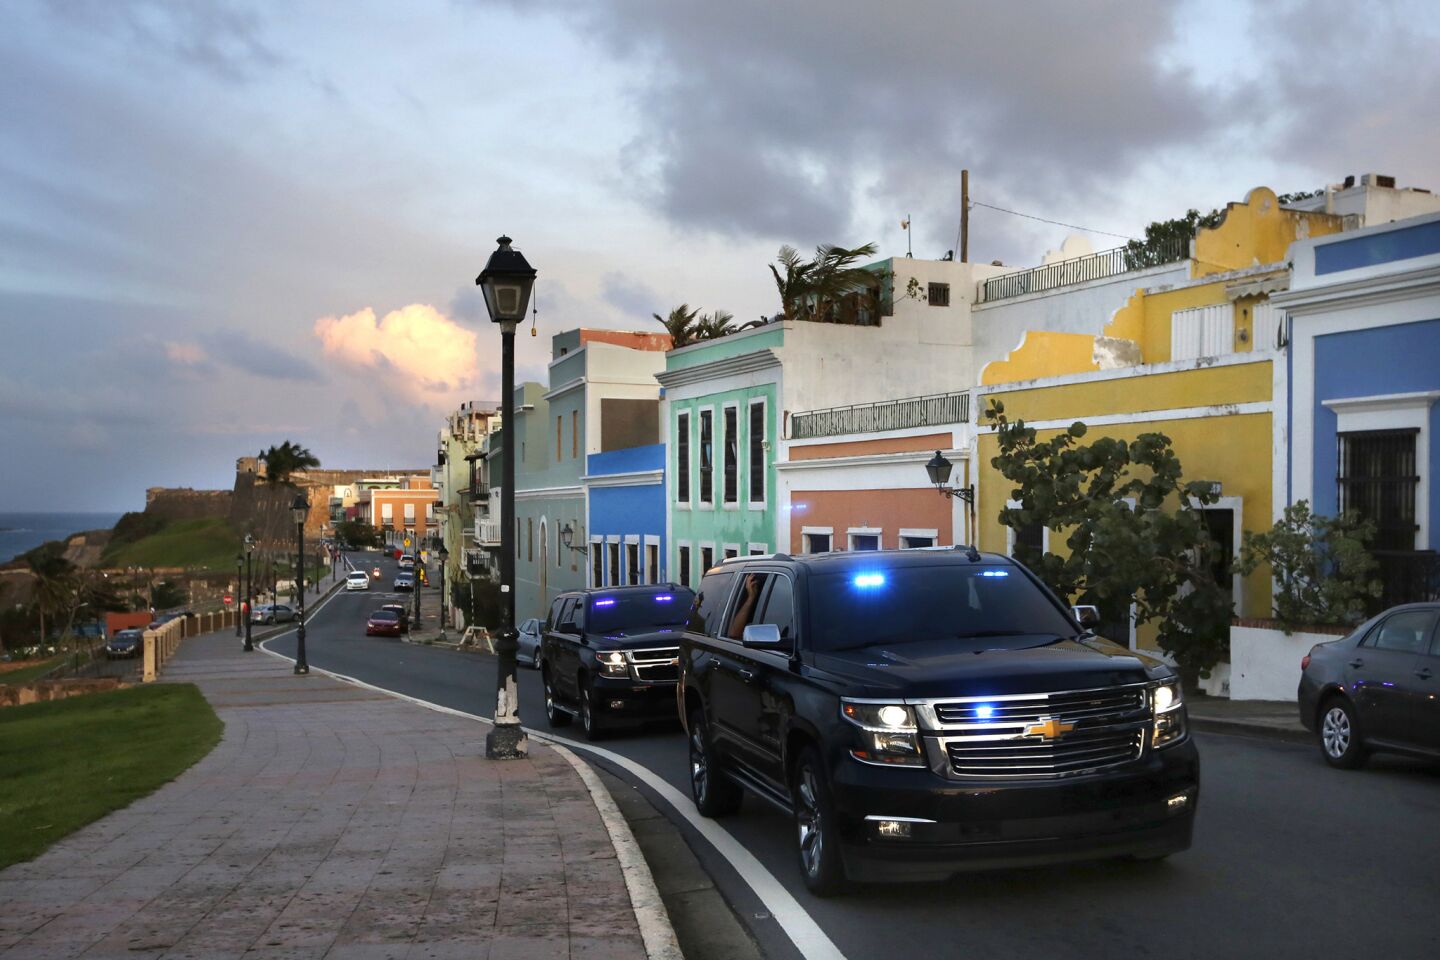 Official cars with loudspeakers roll slowly down a street in Old San Juan, Puerto Rico, broadcasting a warning to residents to evacuate as Hurricane Maria approaches.